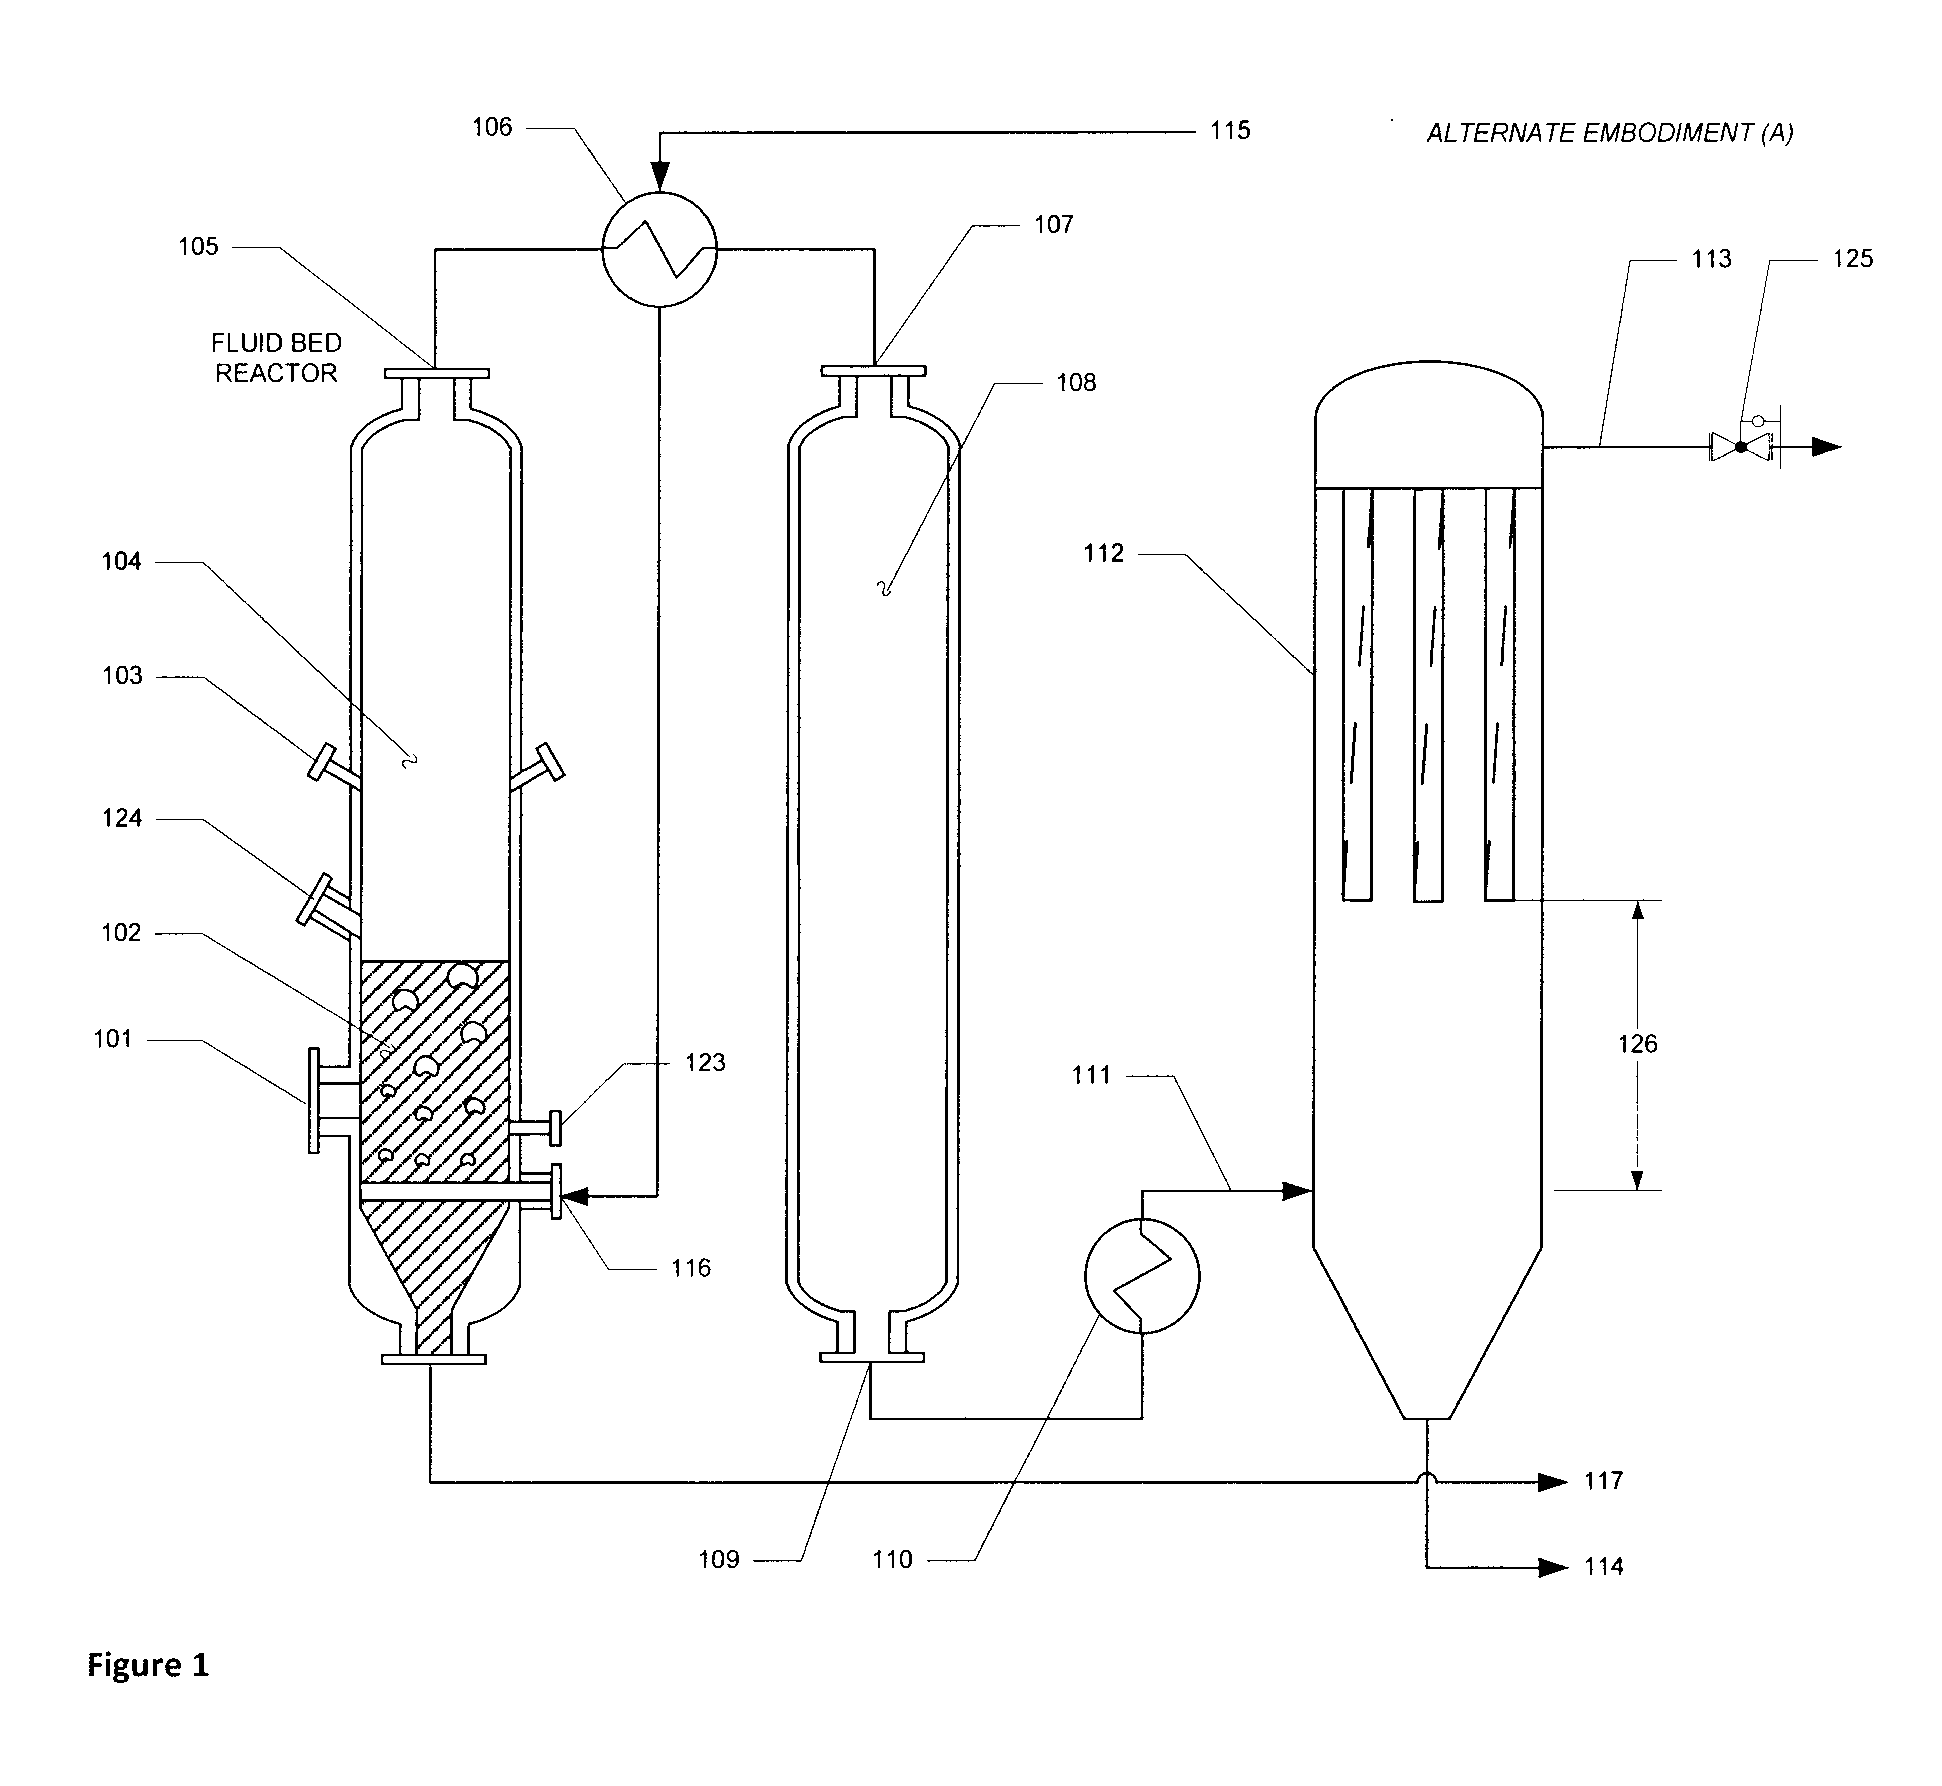 Apparatus and method of optimized acid gas and toxic metal control in gasifier produced gases